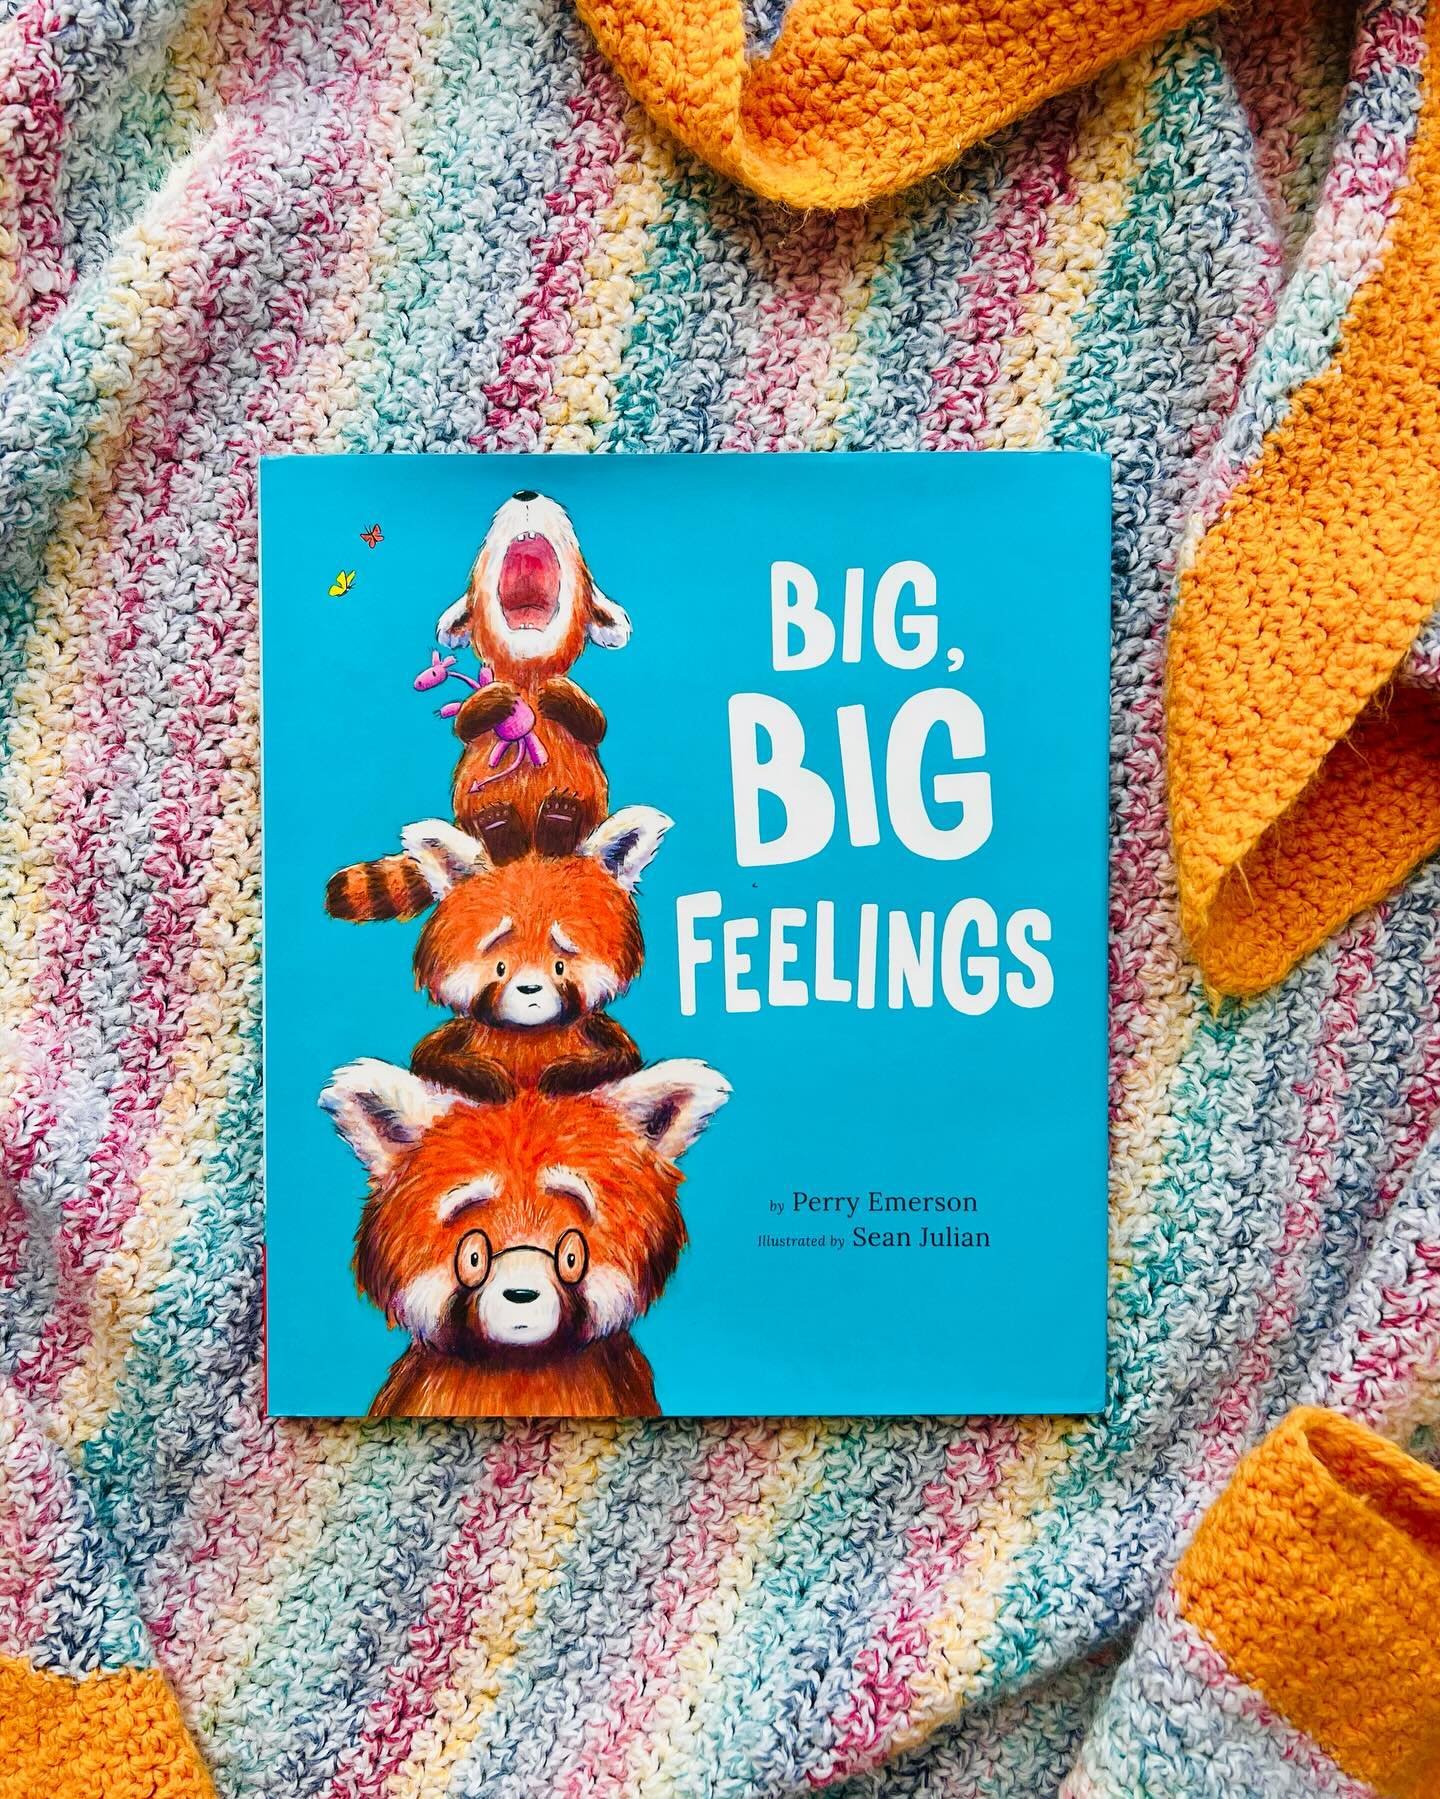 Have you heard the phrase &ldquo;name them to tame them&rdquo; in regard to feelings? 🫶 

In this sweet sibling story, big brother William teaches his little sister Willow how to use her words to manage her big feelings. To help her find her words i